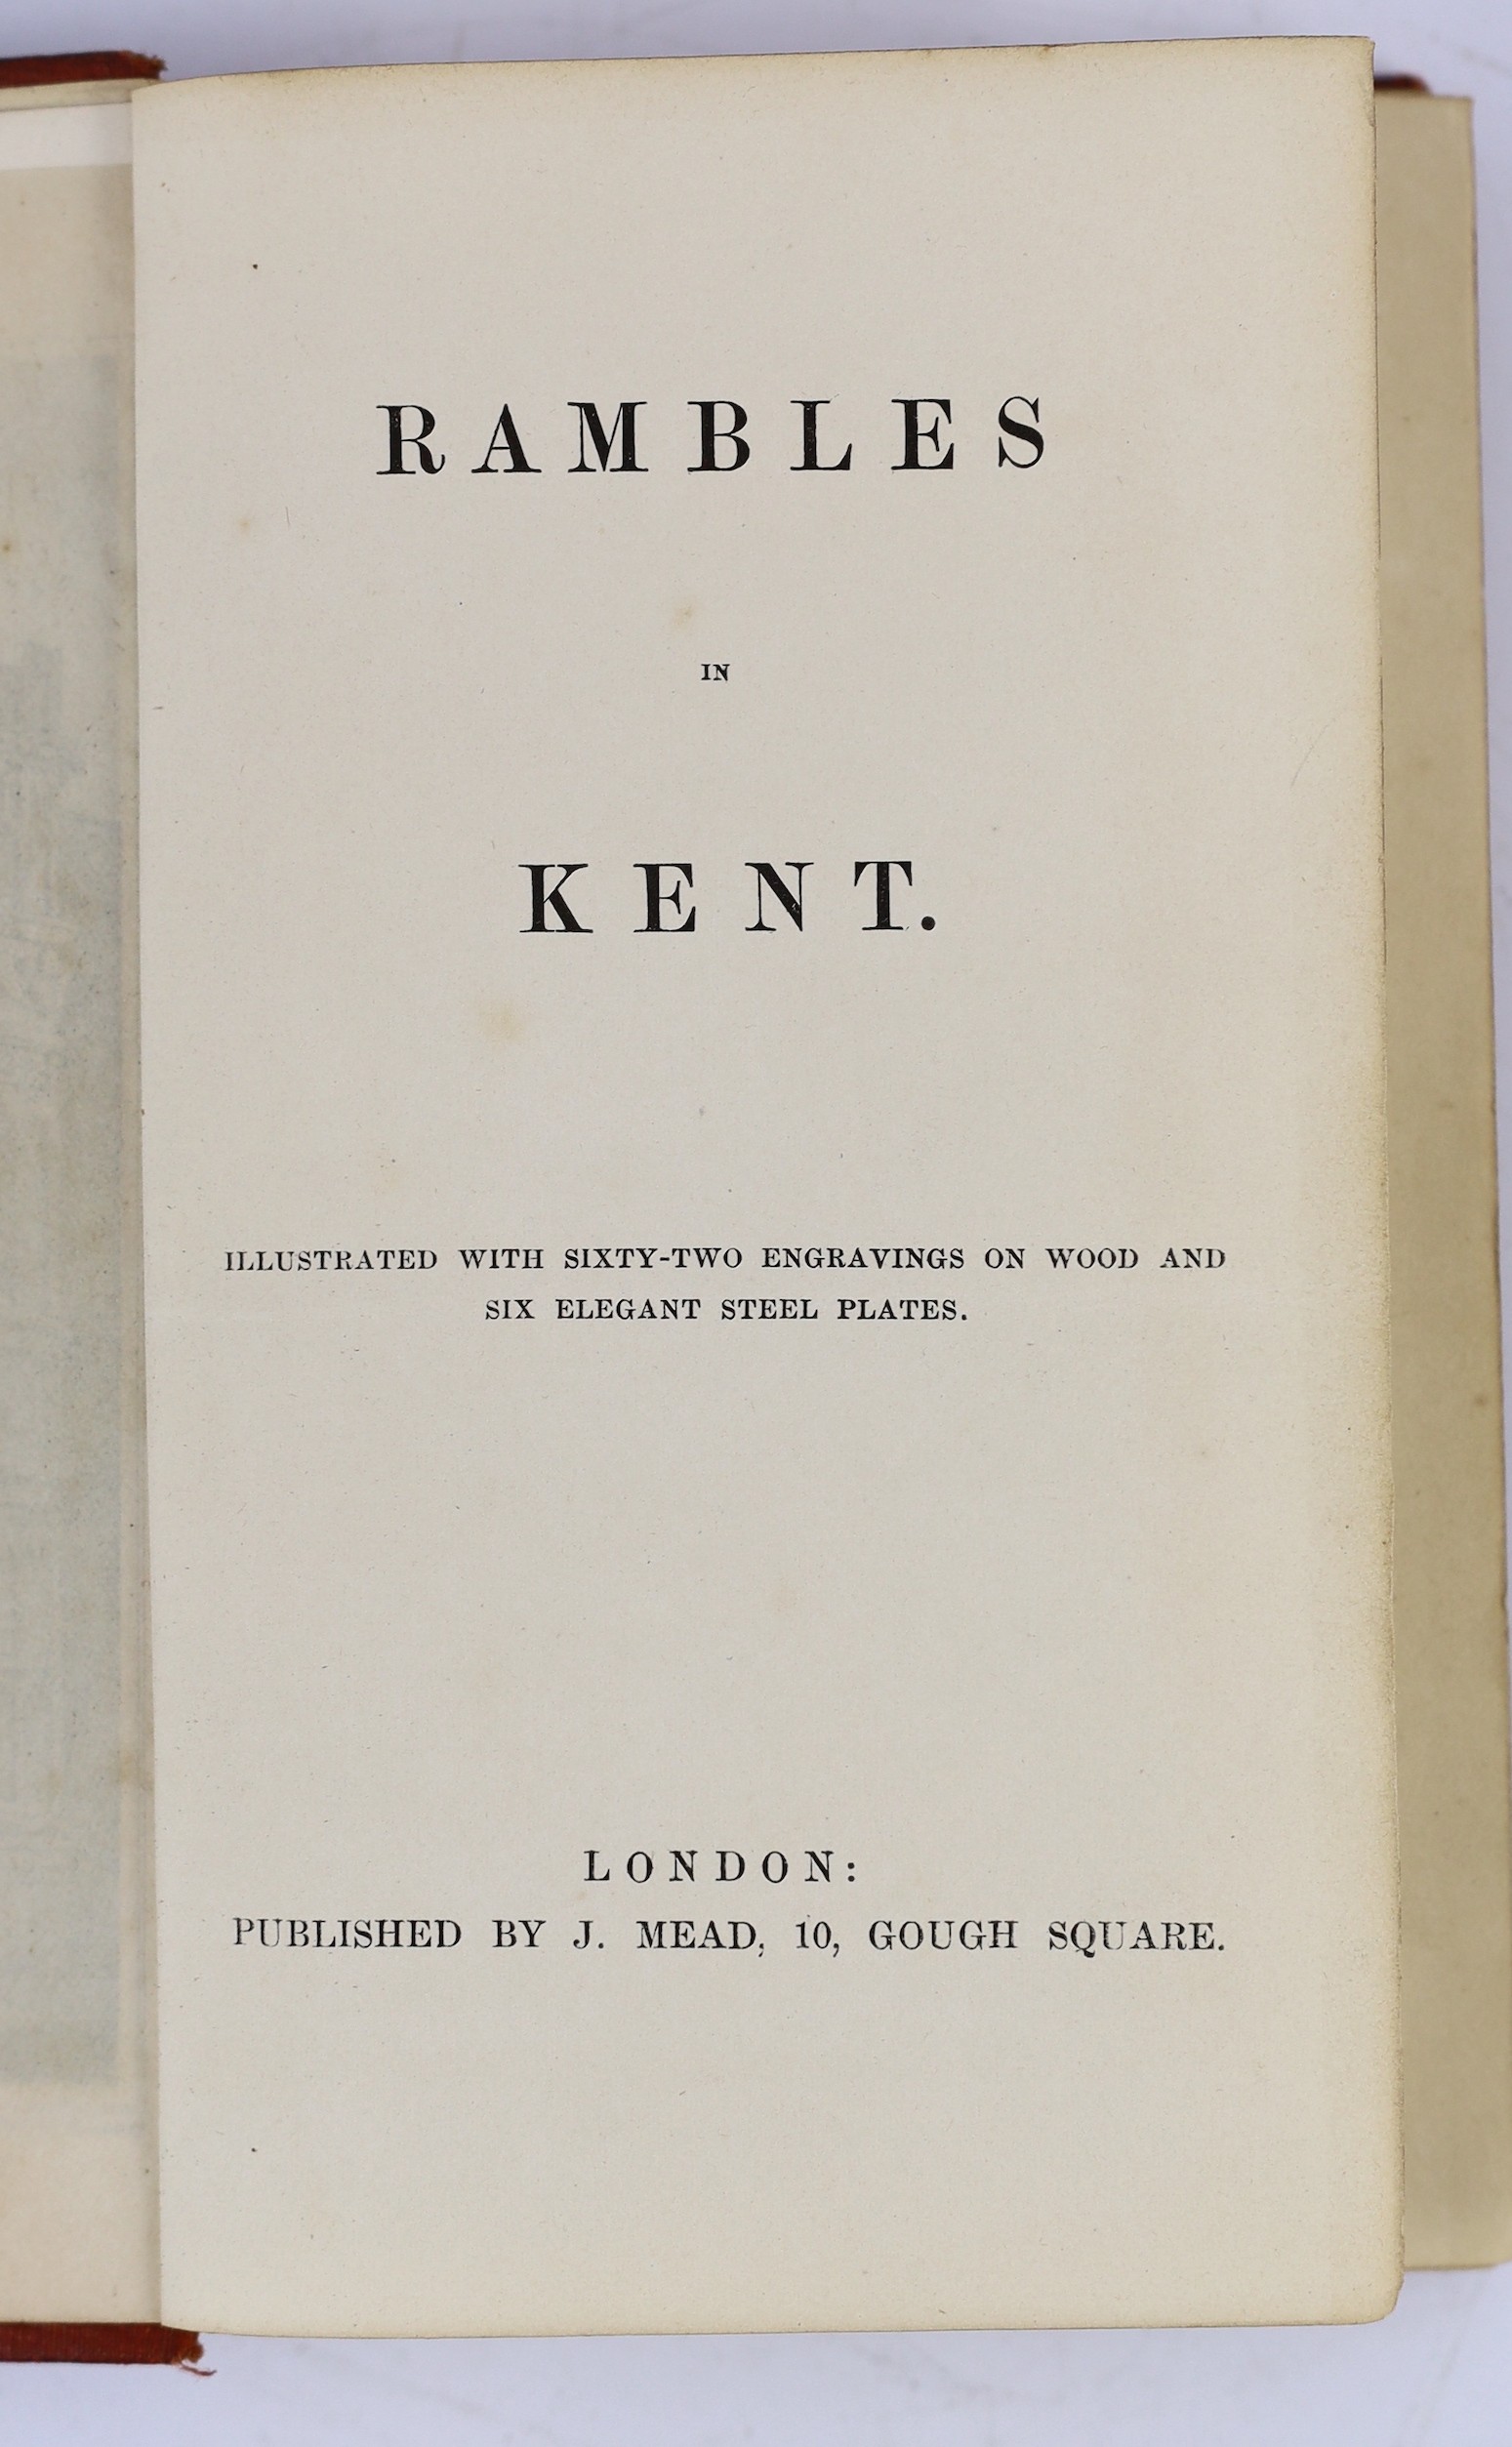 KENT: Excursions in the County of Kent....forming a complete guide for the traveller and tourist....pictorial engraved and printed titles, folded map and folded Canterbury plan, 45 plates; old half calf and marbled board